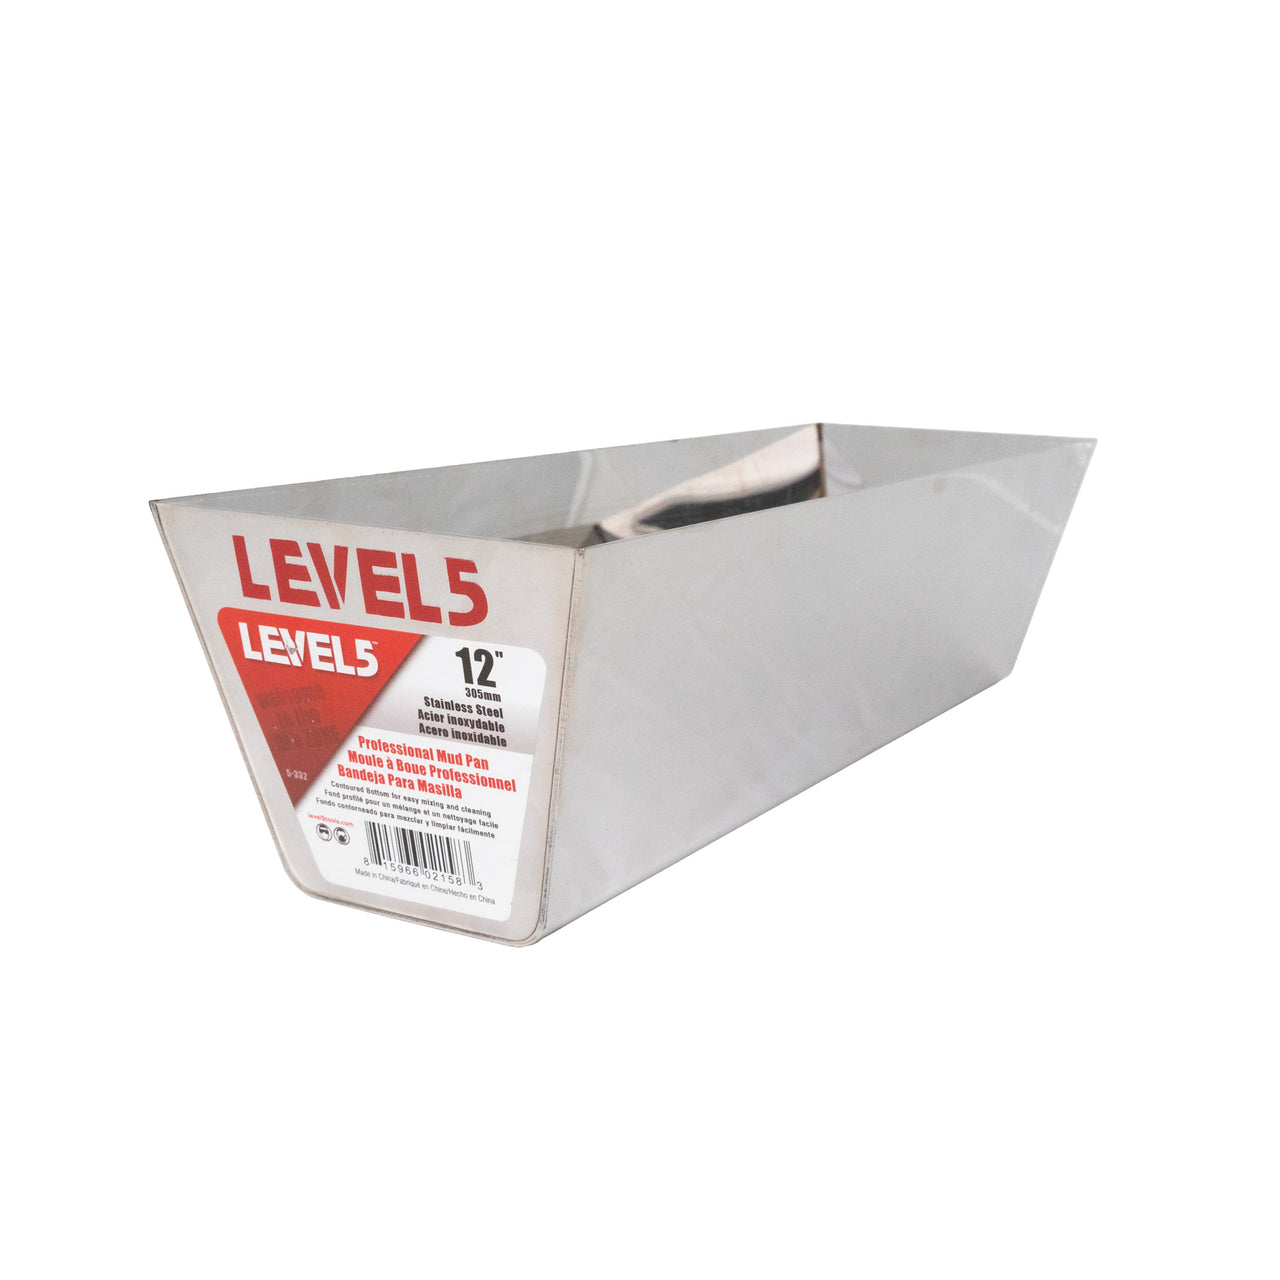 12" Level 5 Mud Pan Paint Life Supply Co.